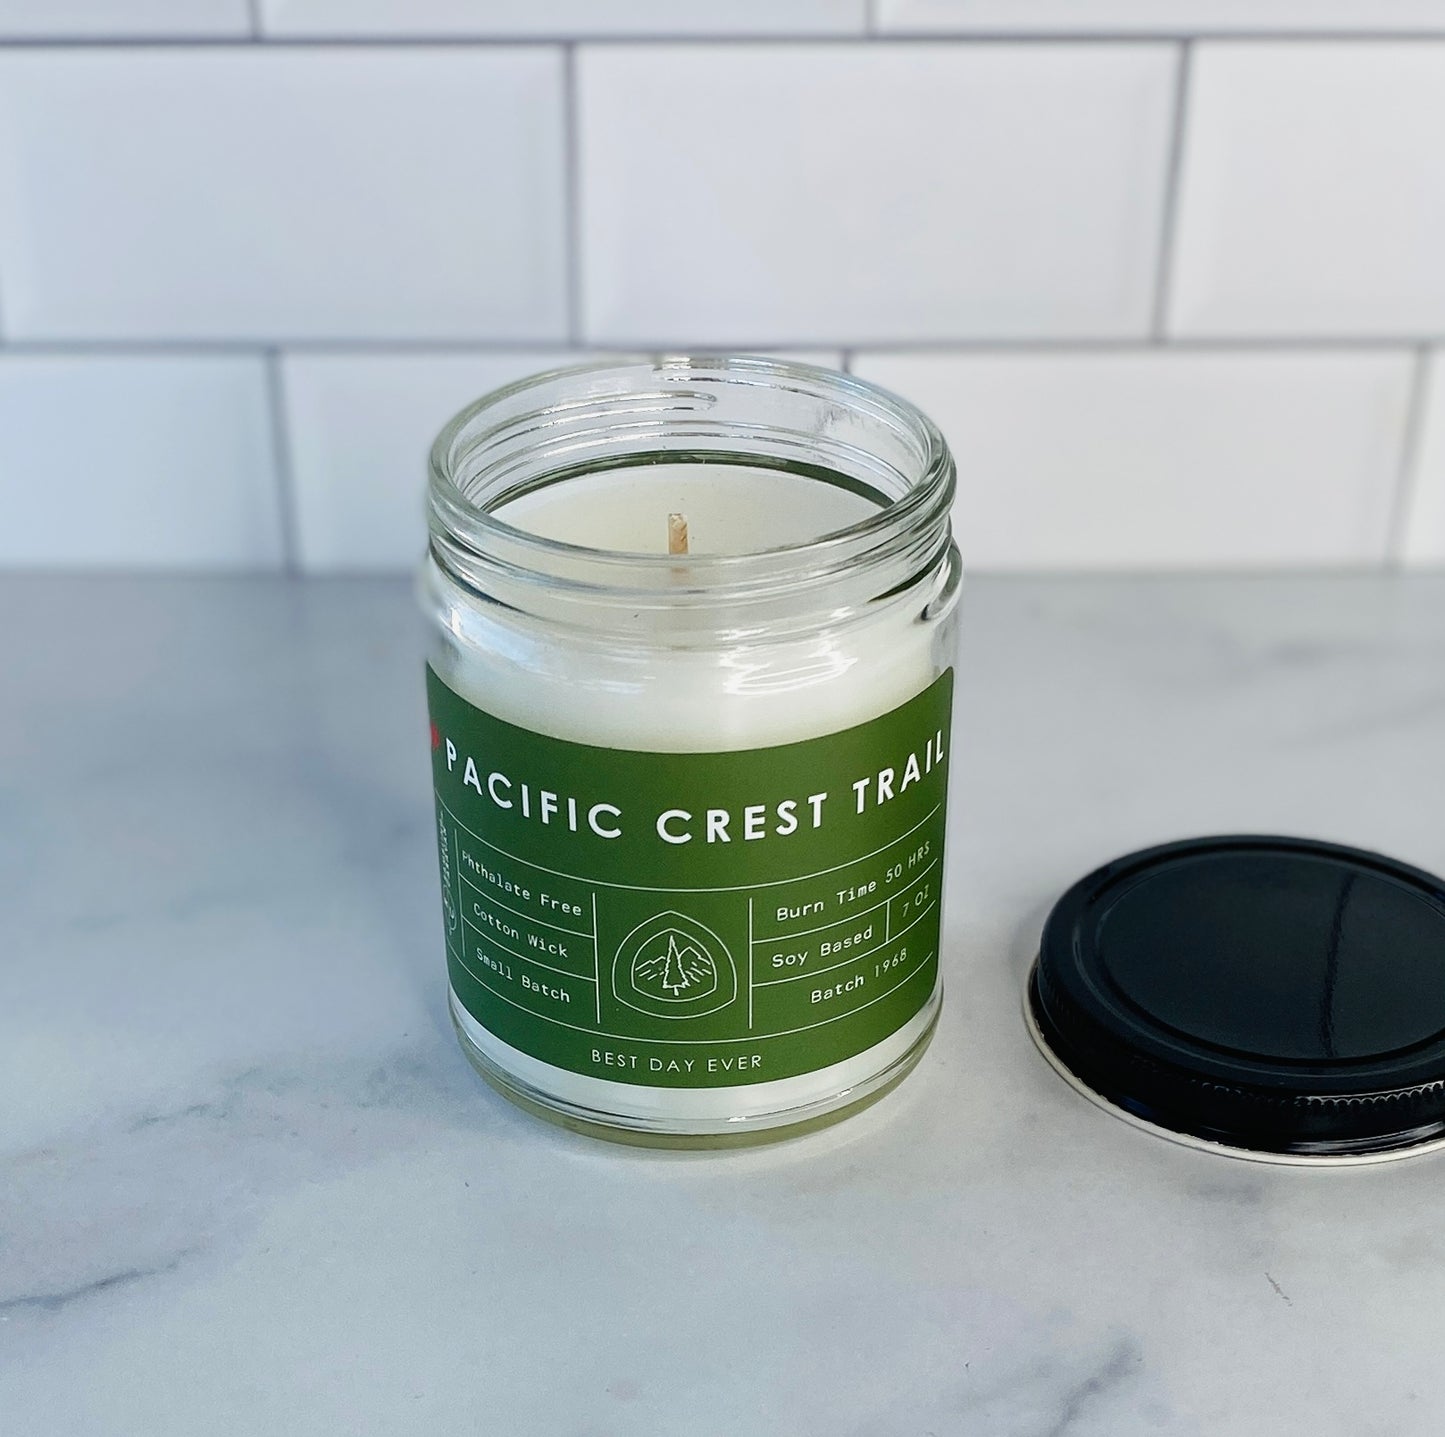 Pacific Crest Trail Candle